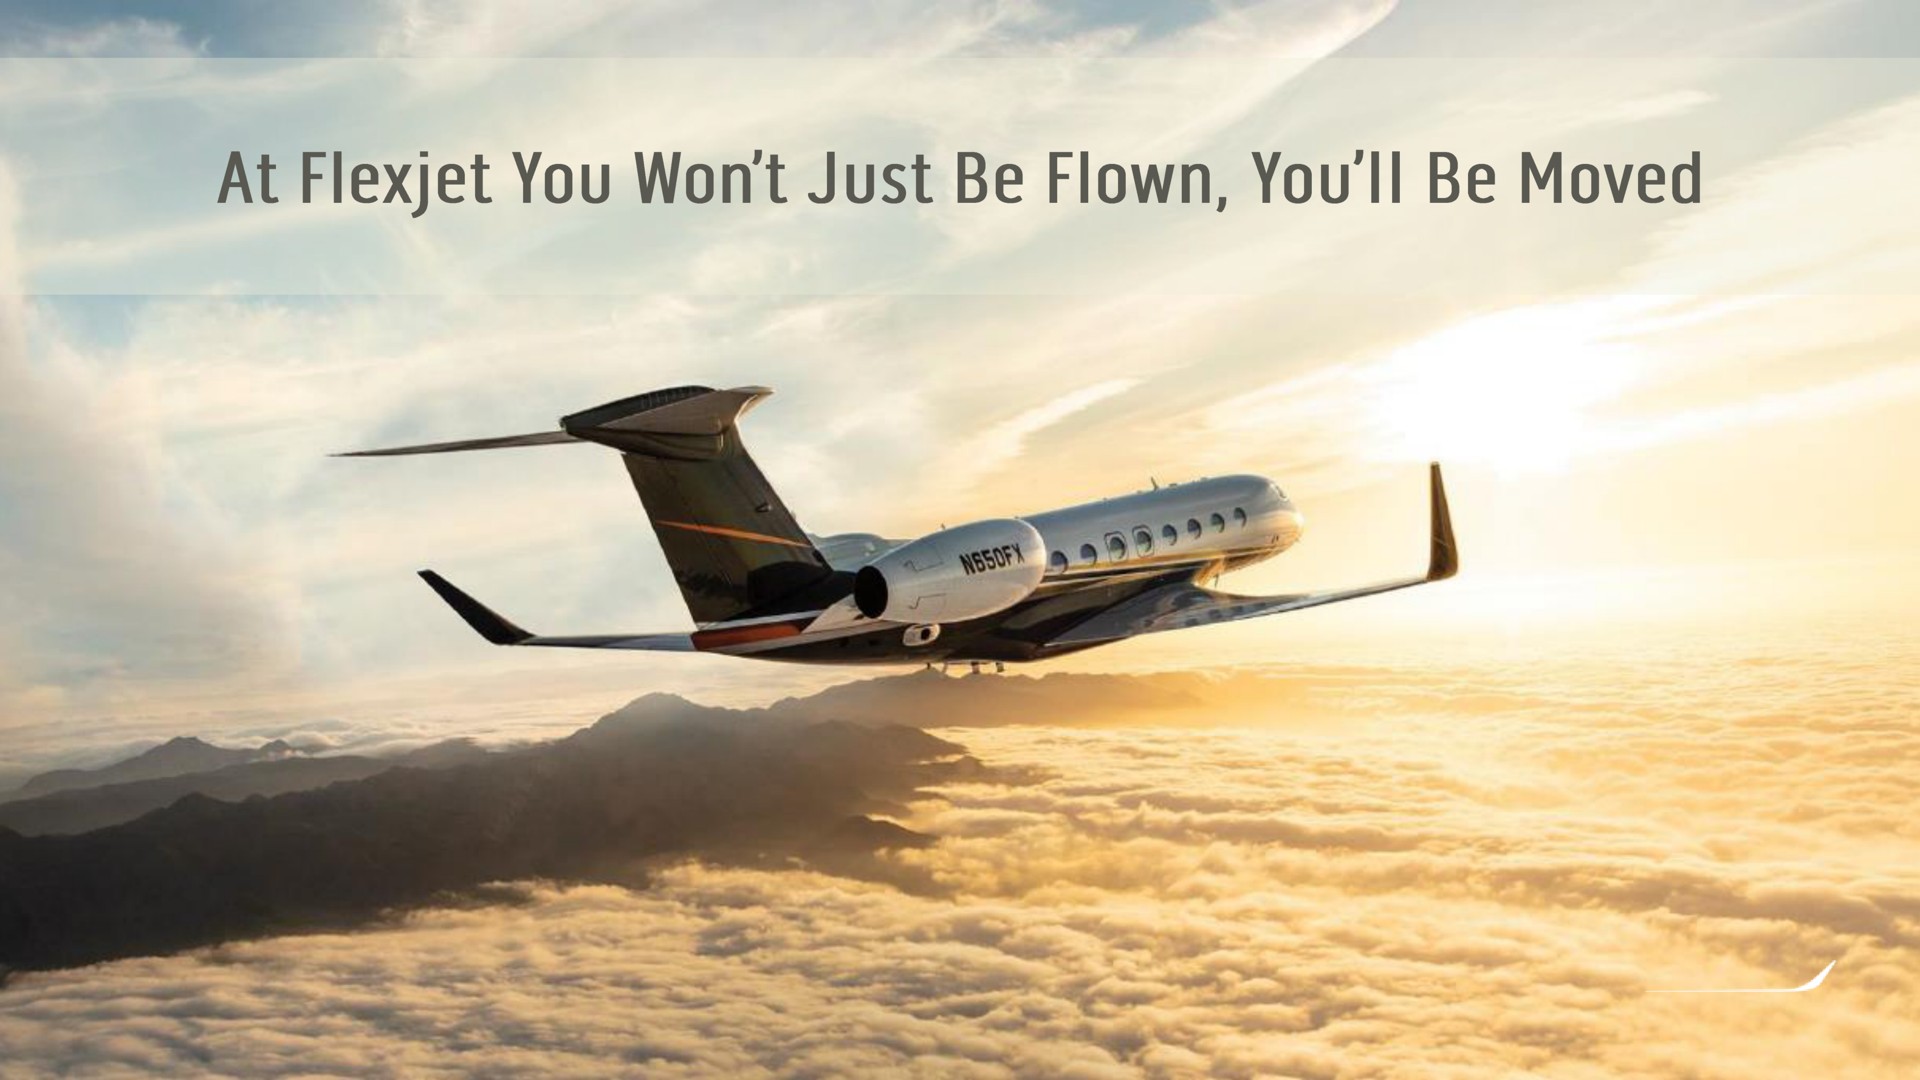 at you wont just be flown you be moved | FlexJet